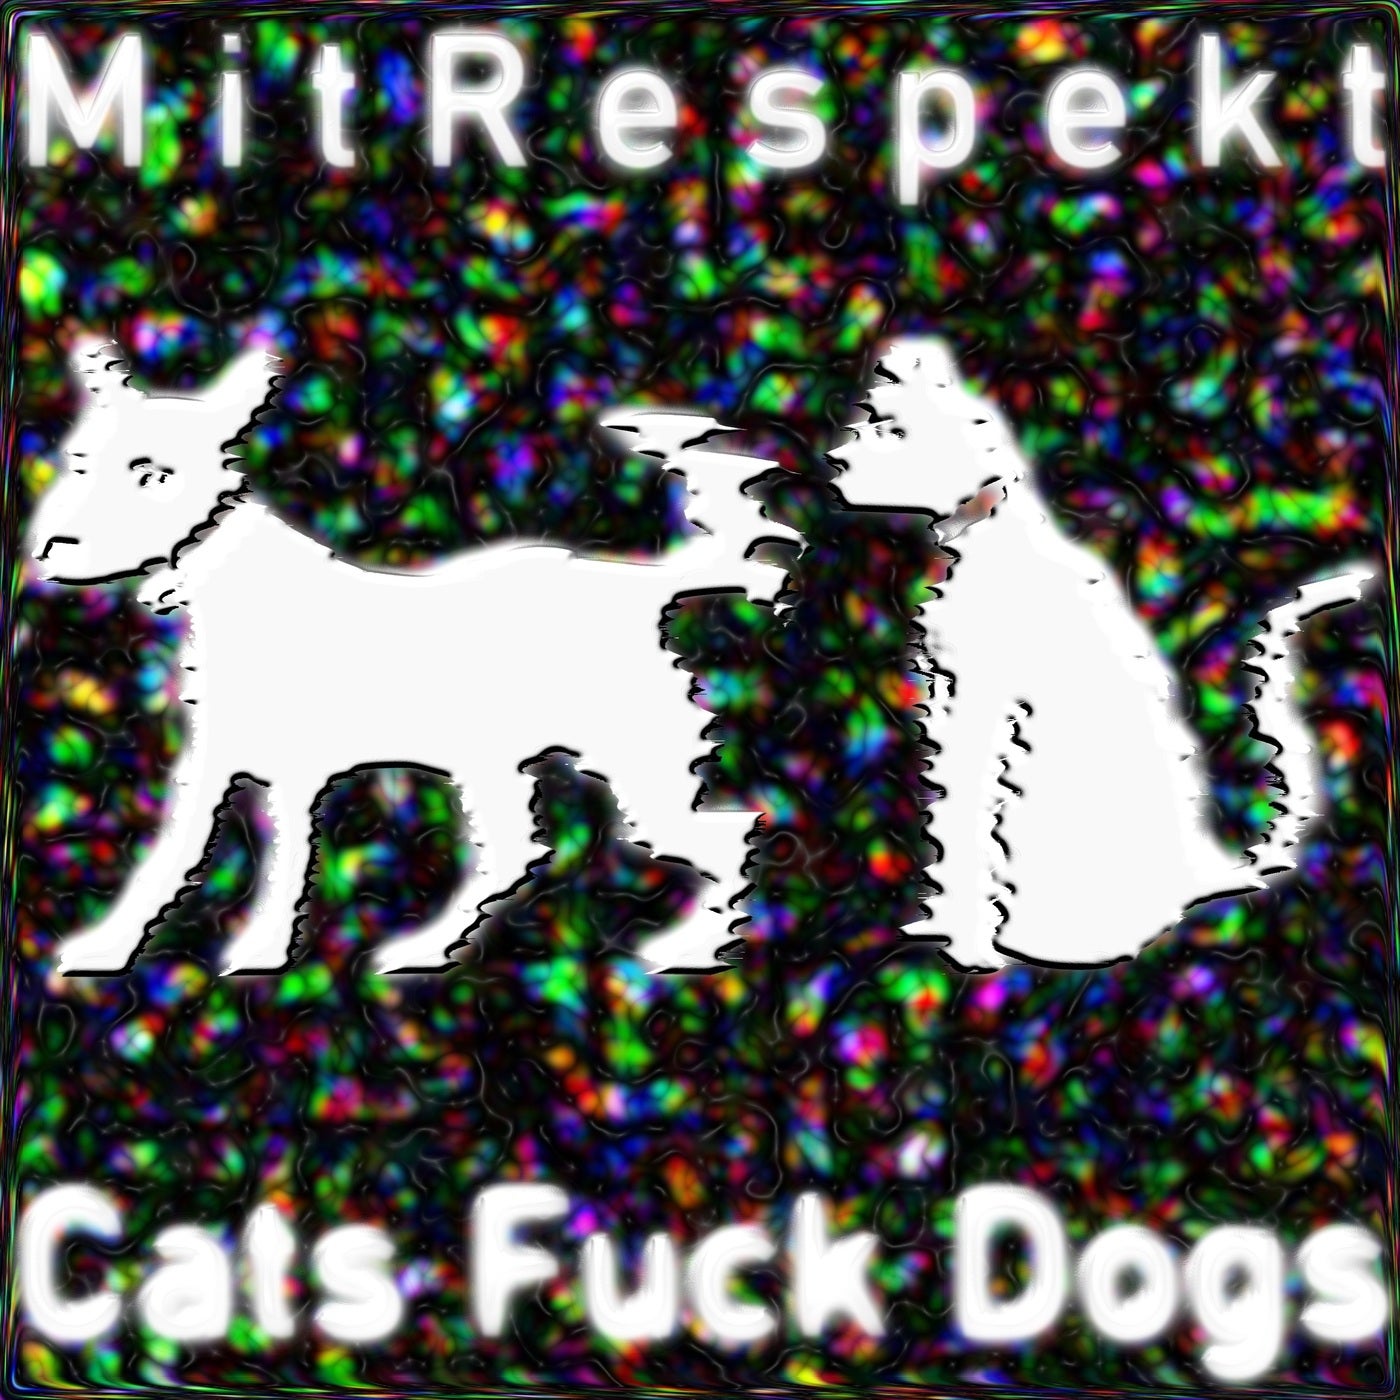 Cats Fuck Dogs